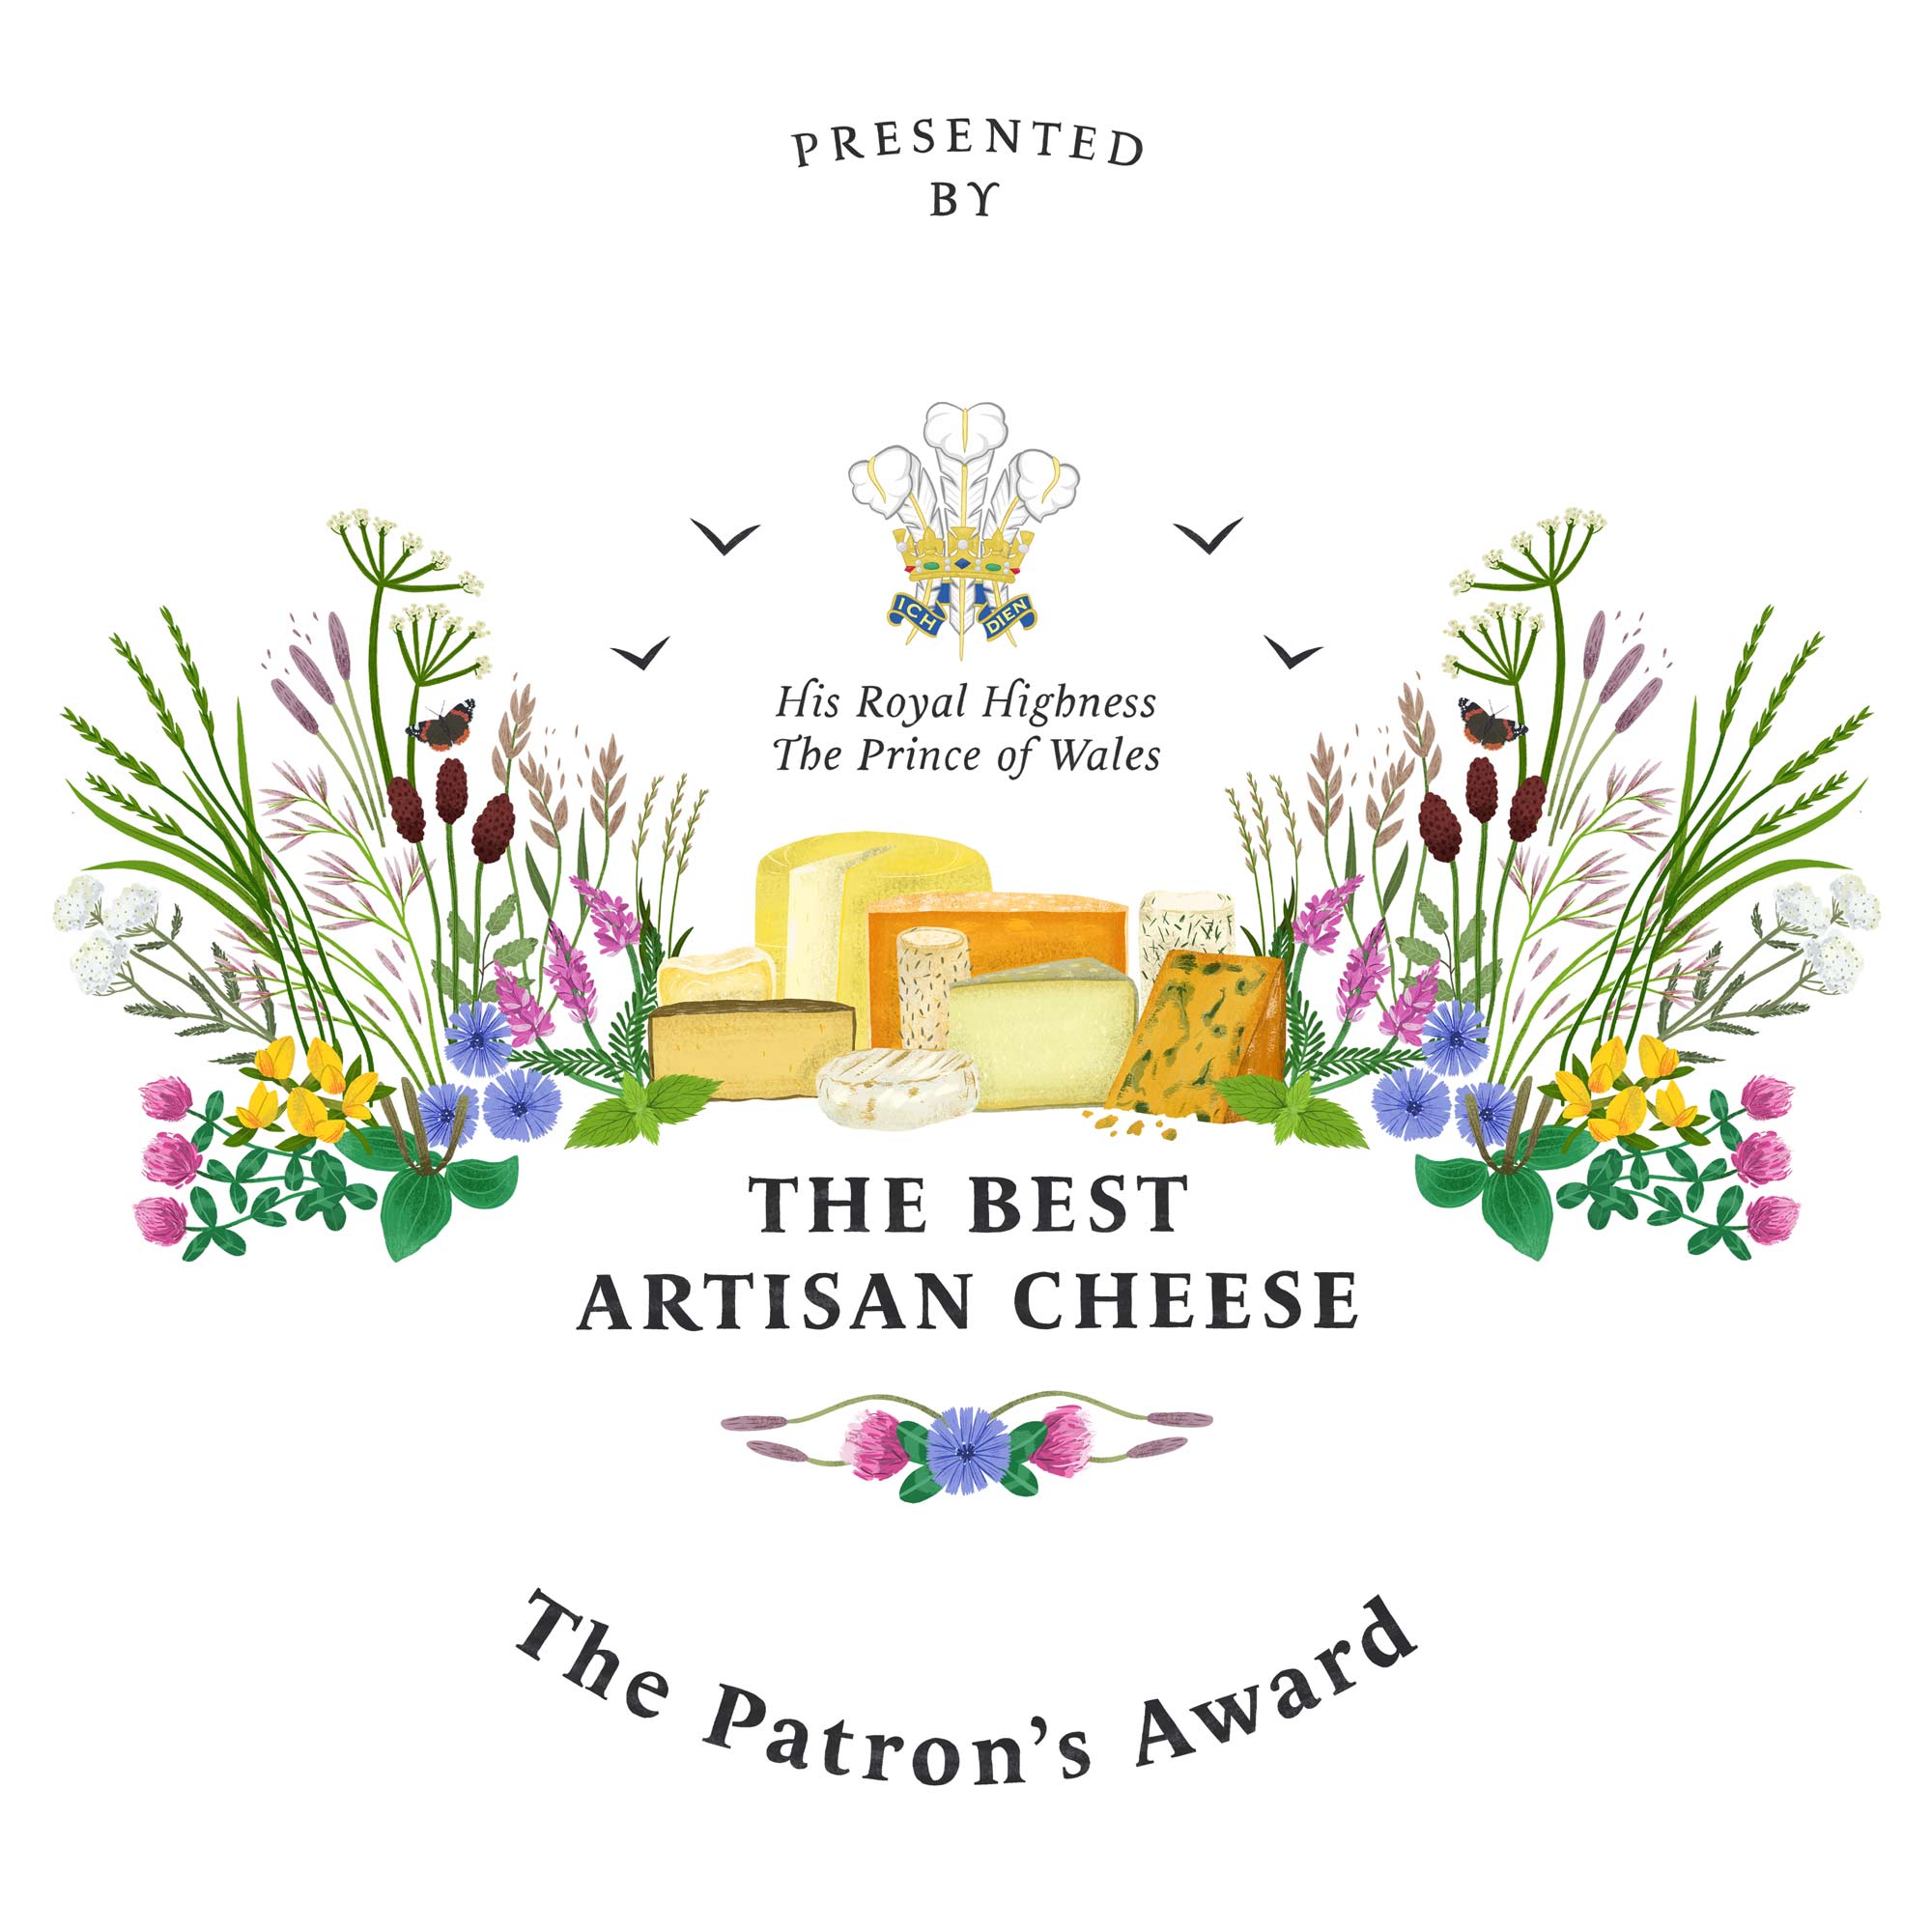 Artwork for the Best Artisan Cheese Award plate by Elly Jahnz